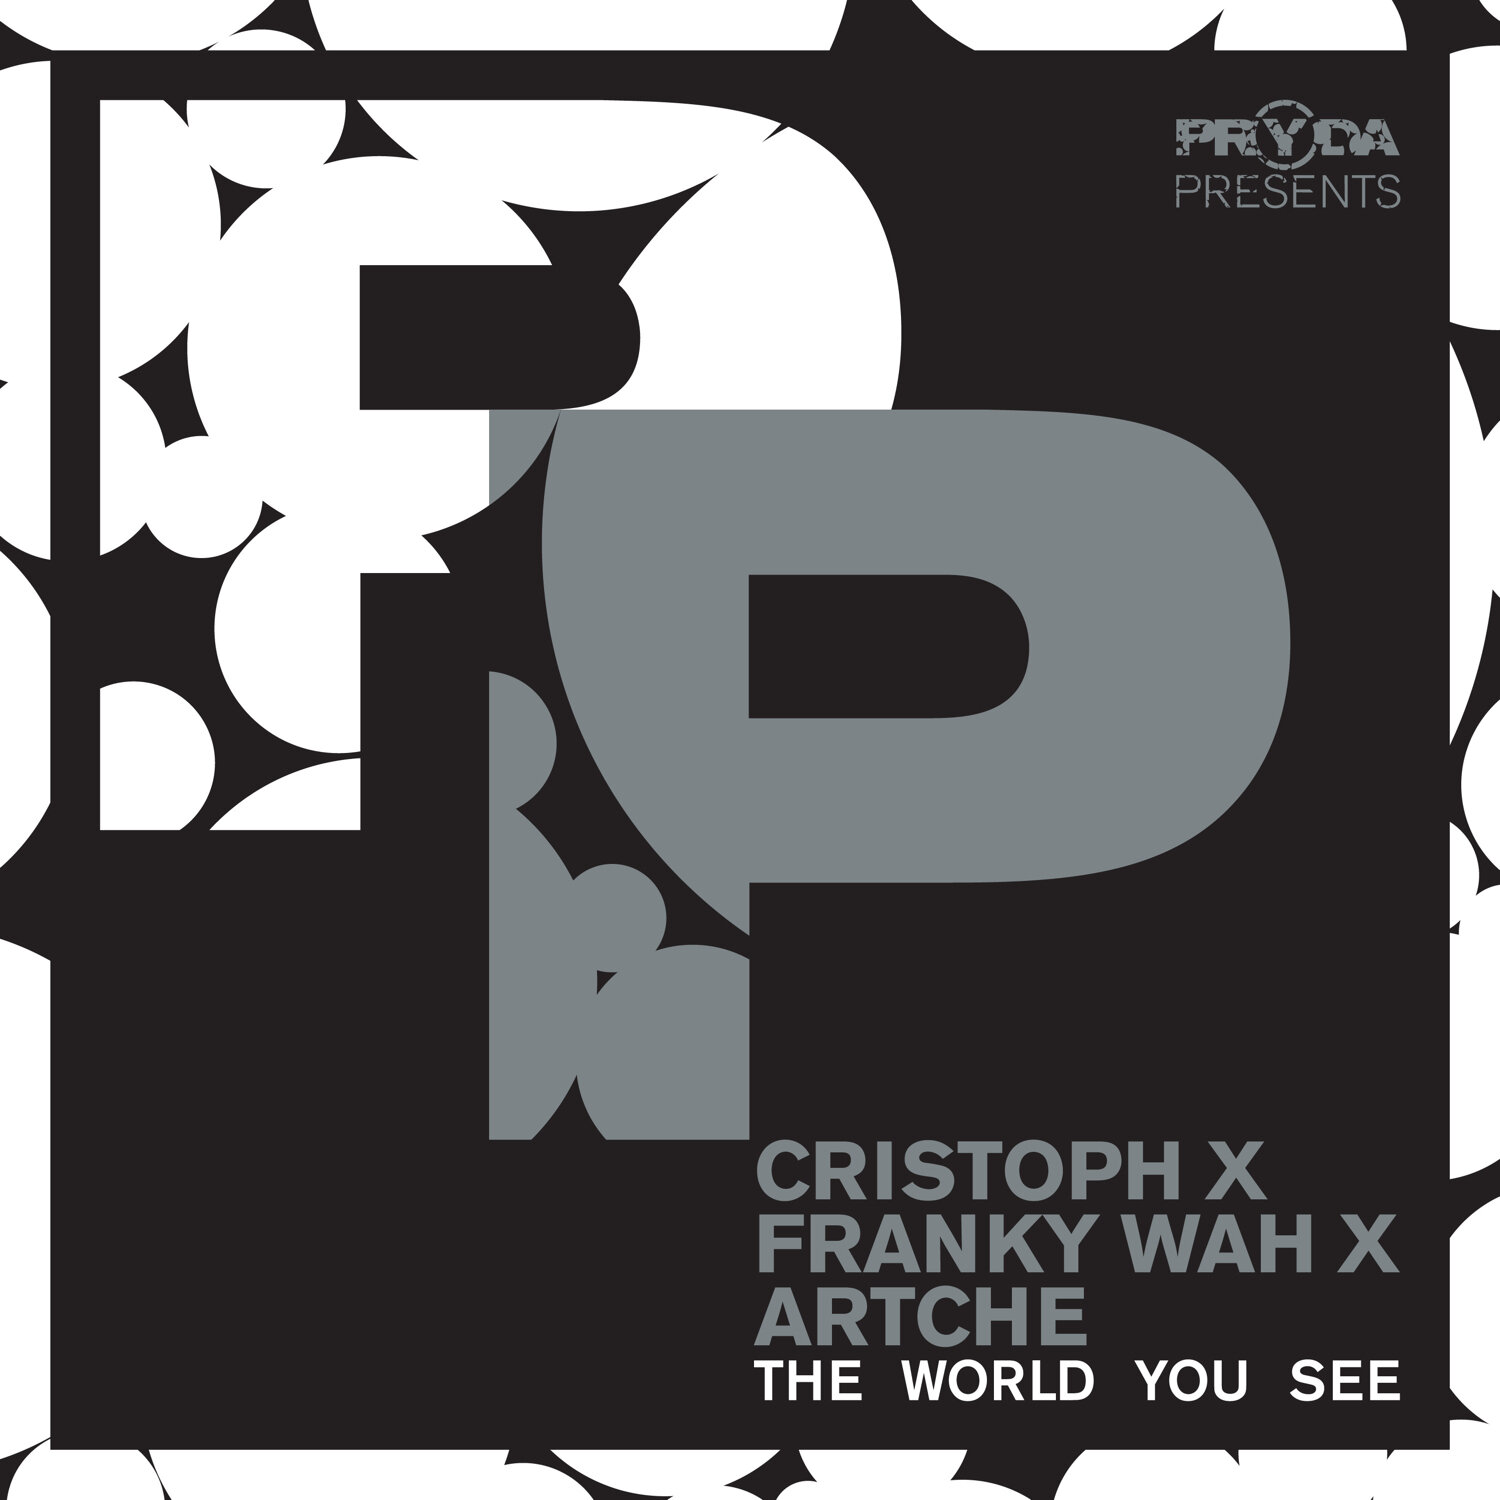 The World You See<b>Cristoph, Franky Wah, Artche</b>